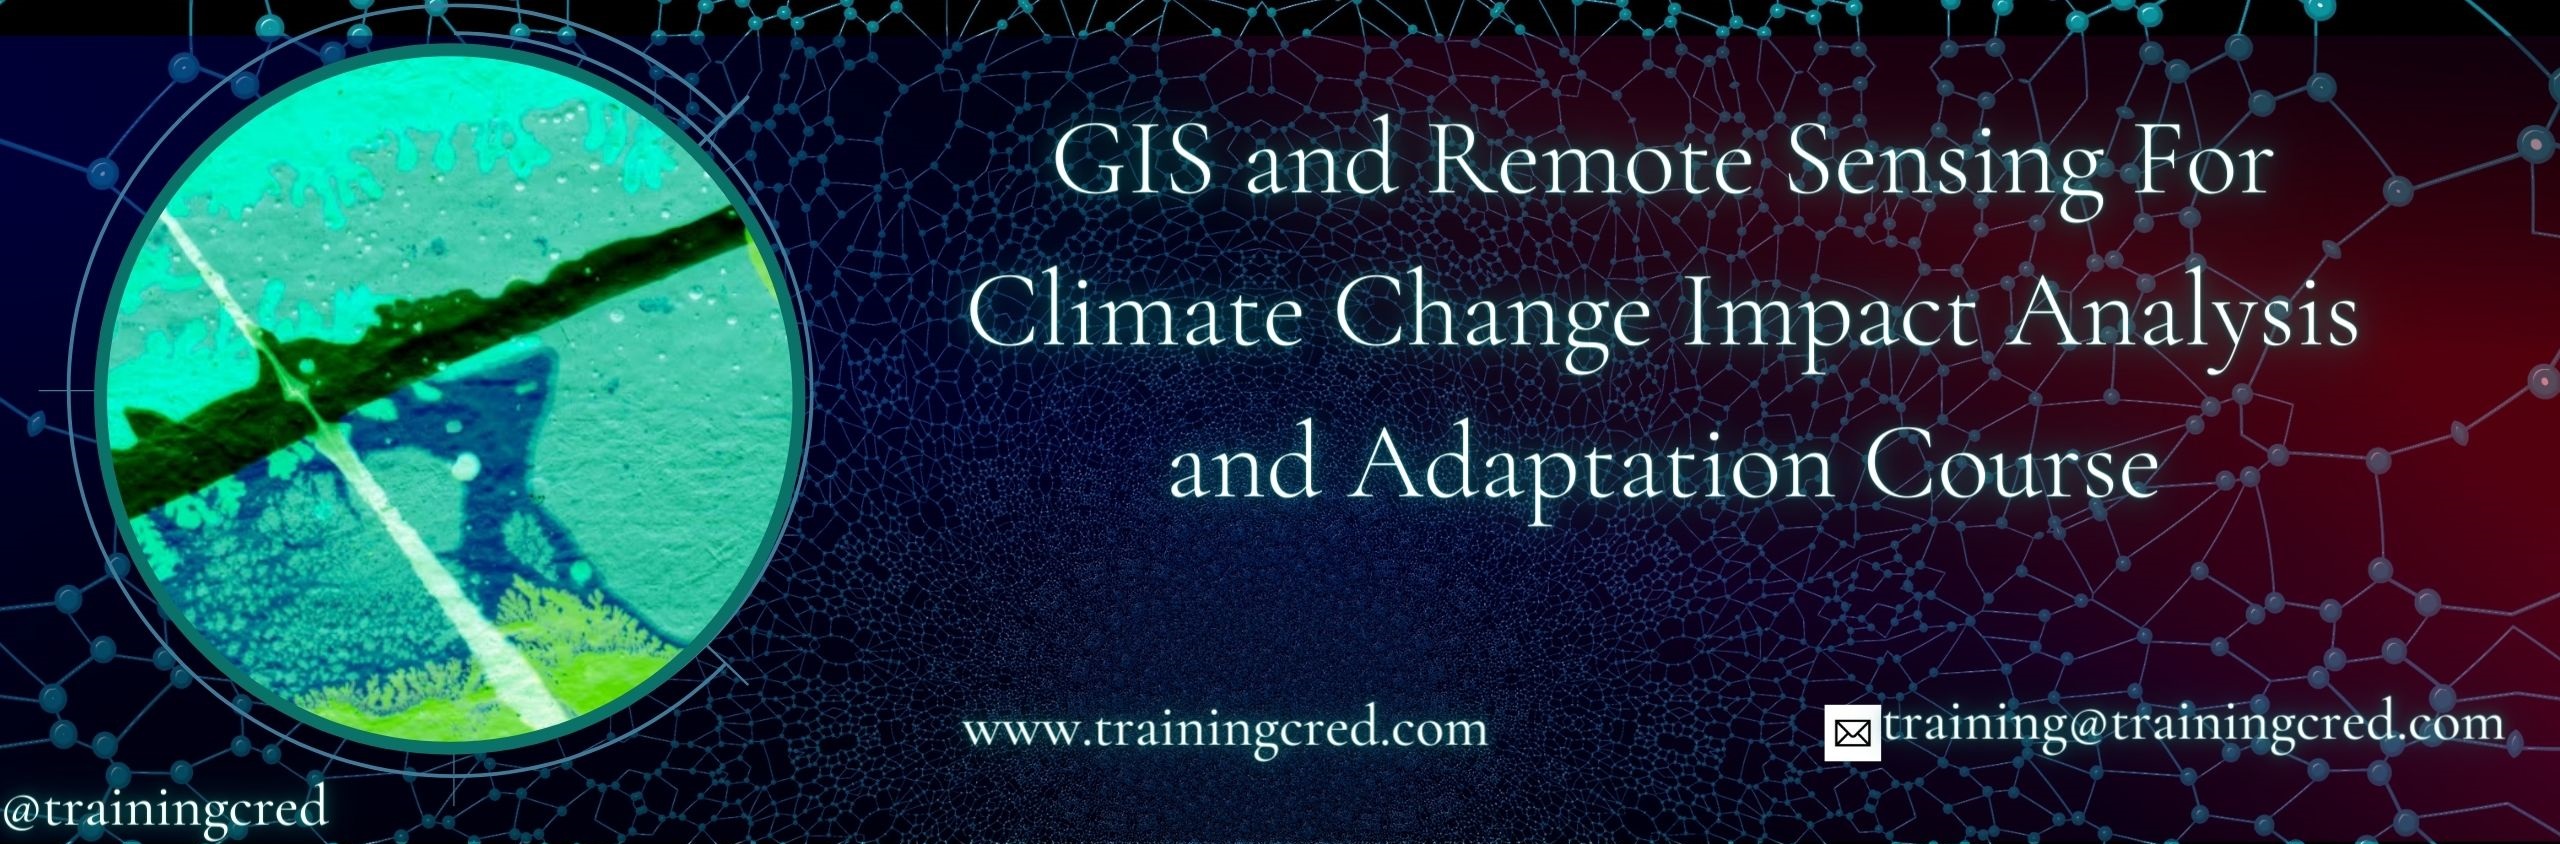 GIS and Remote Sensing For Climate Change Impact Analysis and Adaptation